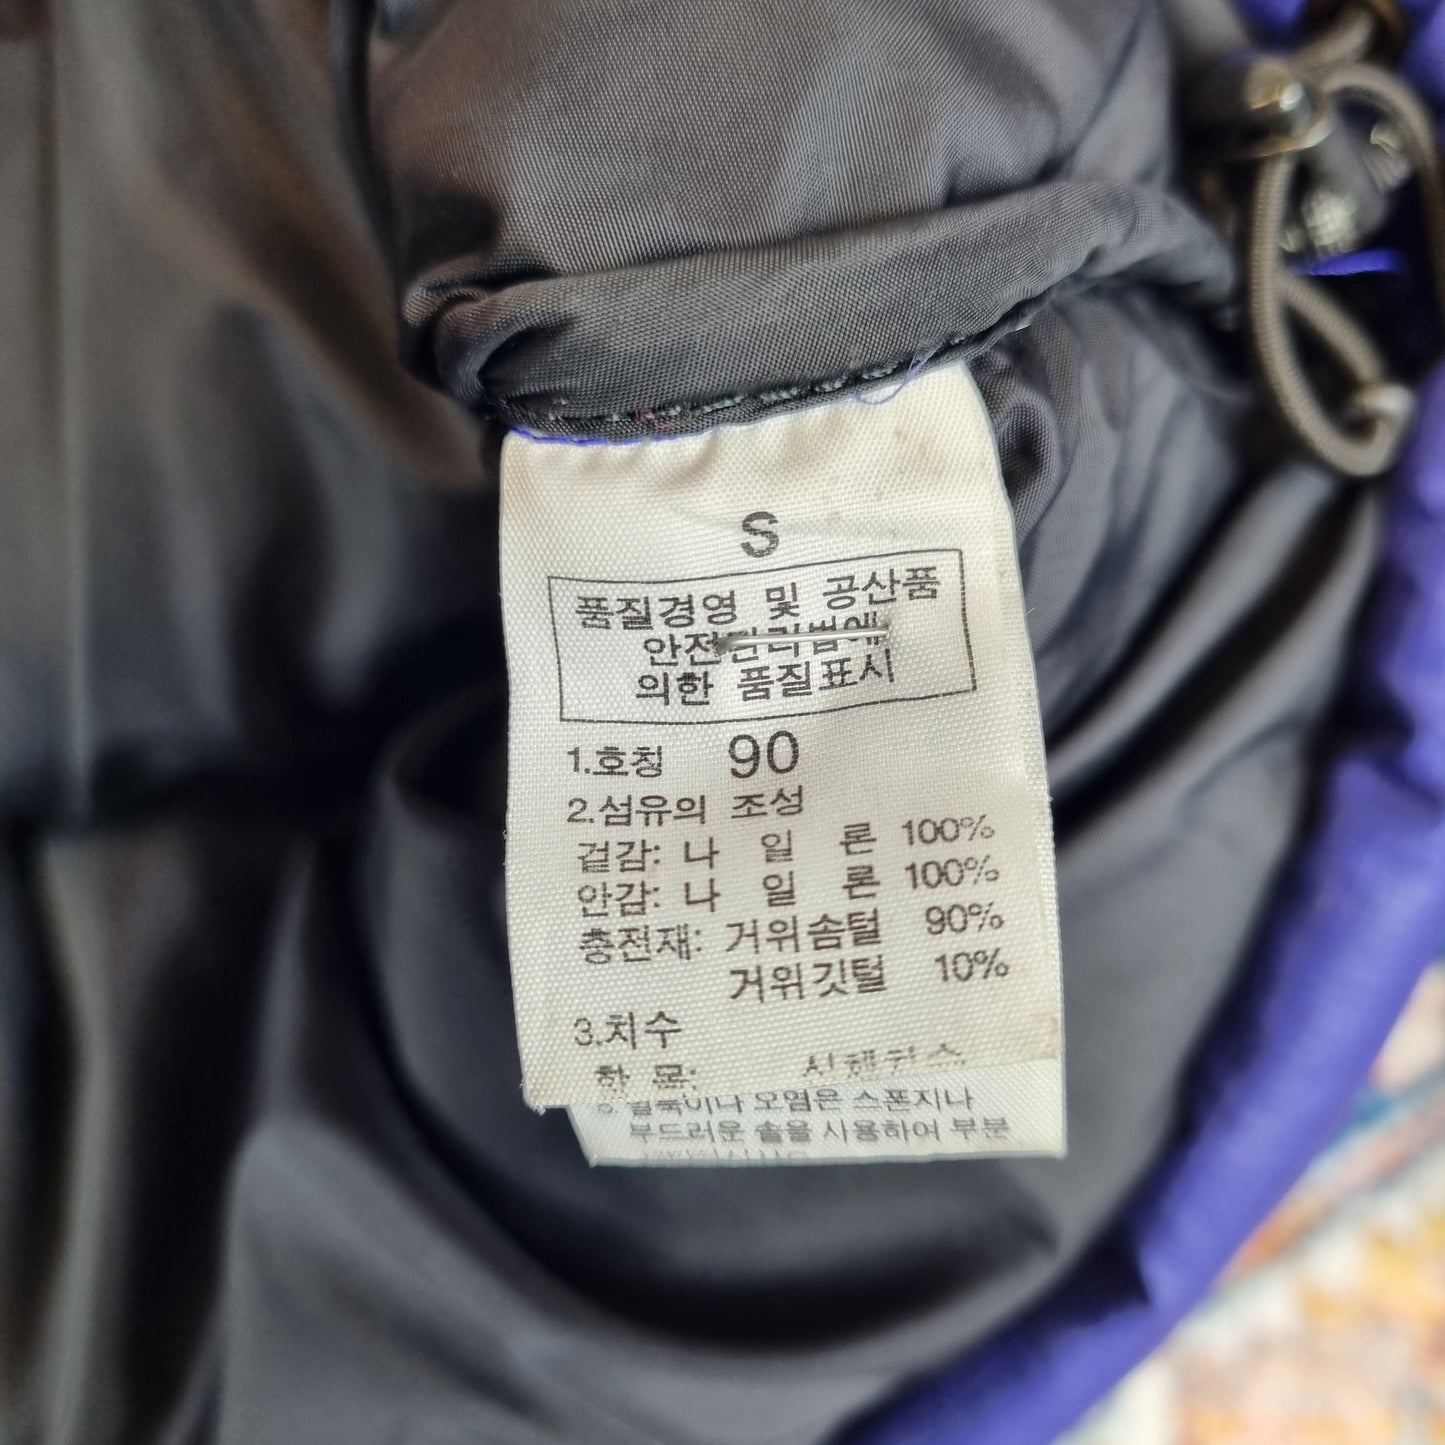 The North Face 700 Puffer (S)